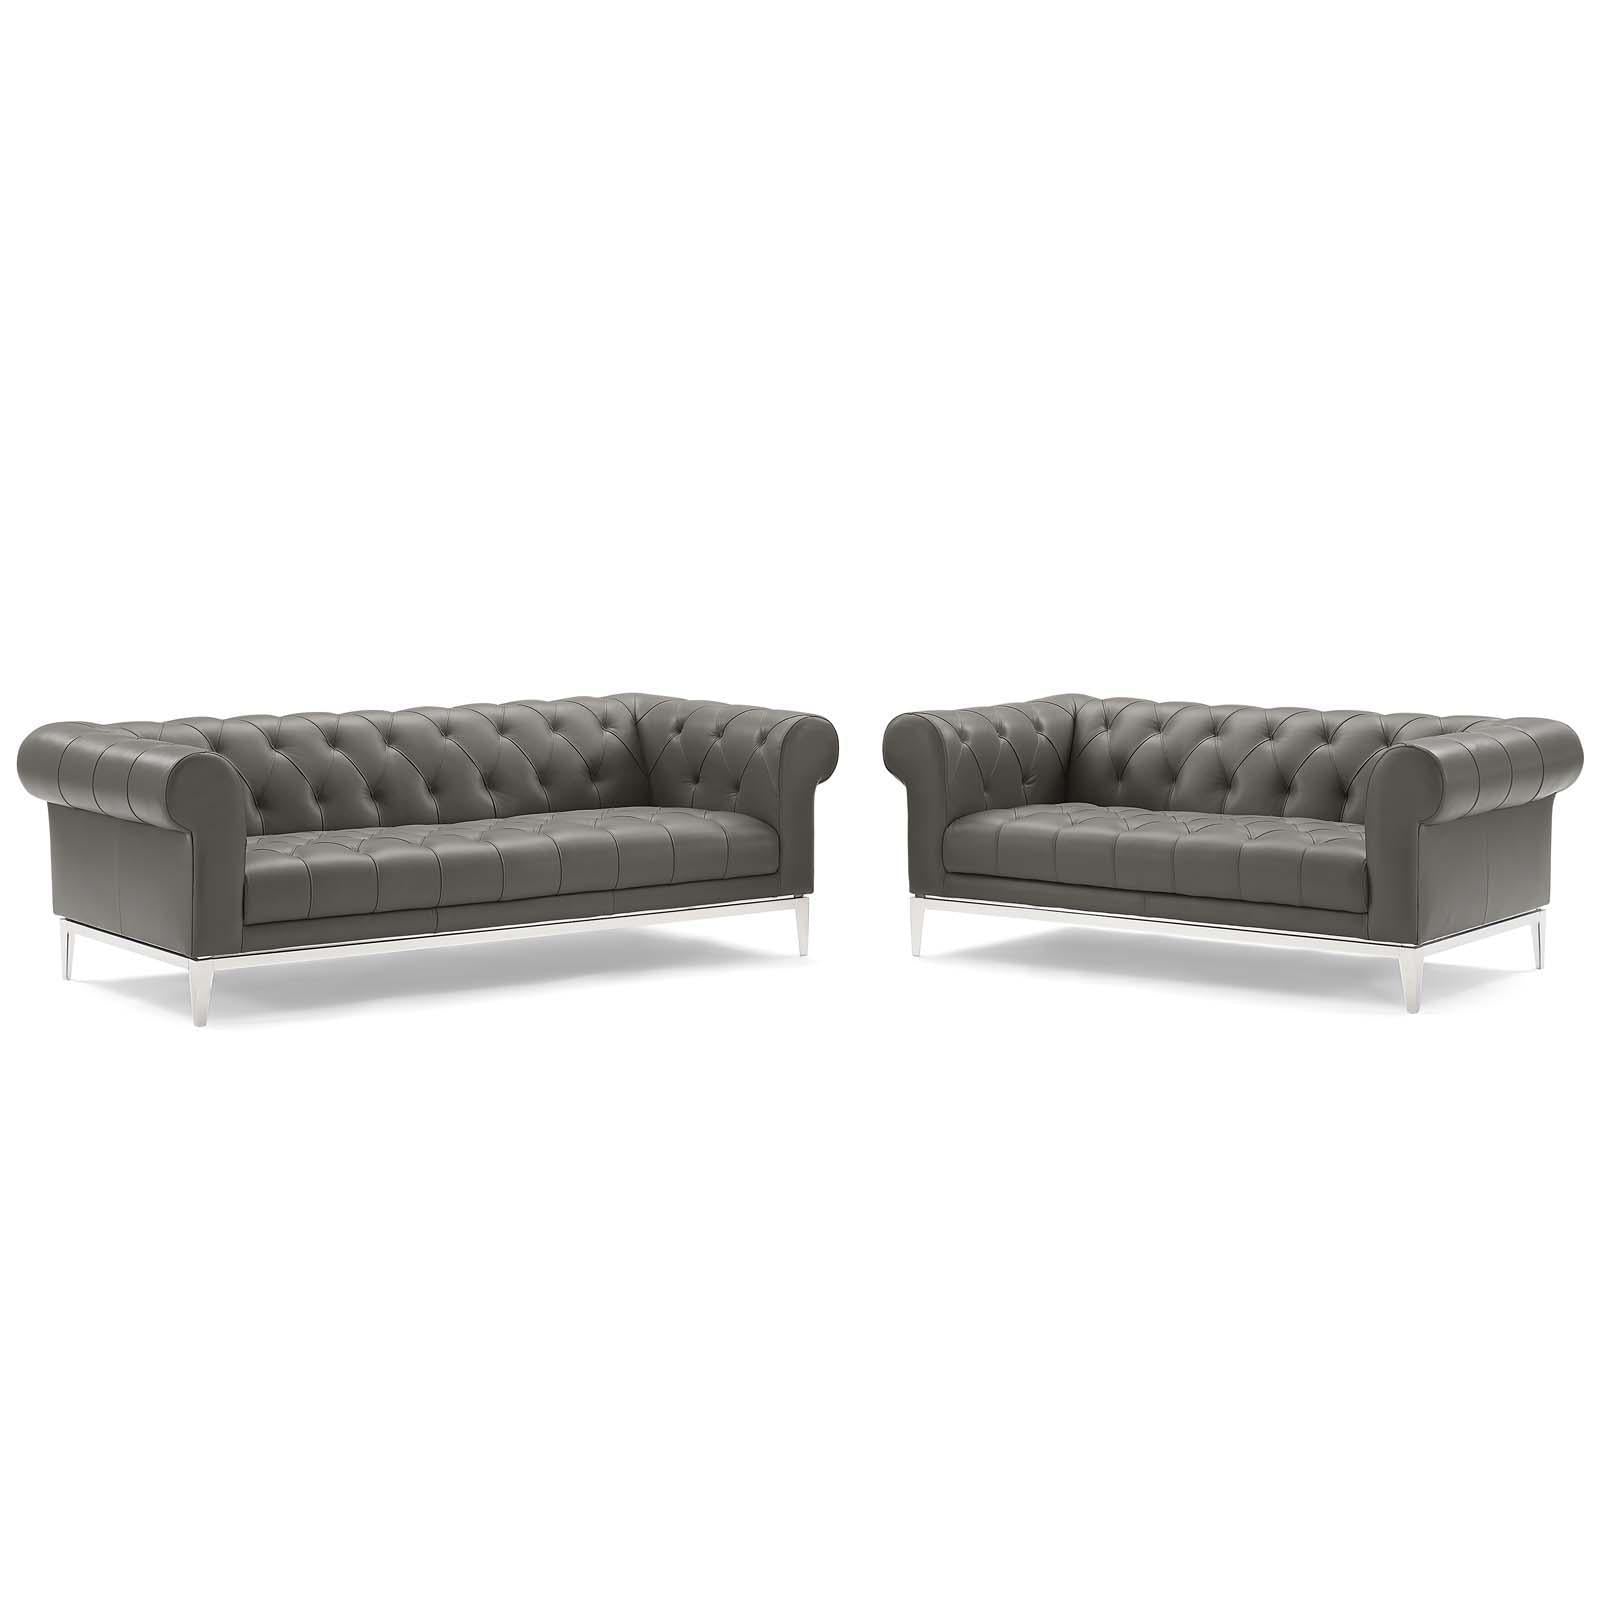 Modway Furniture Modern Idyll Tufted Upholstered Leather Sofa and Loveseat Set - EEI-4189